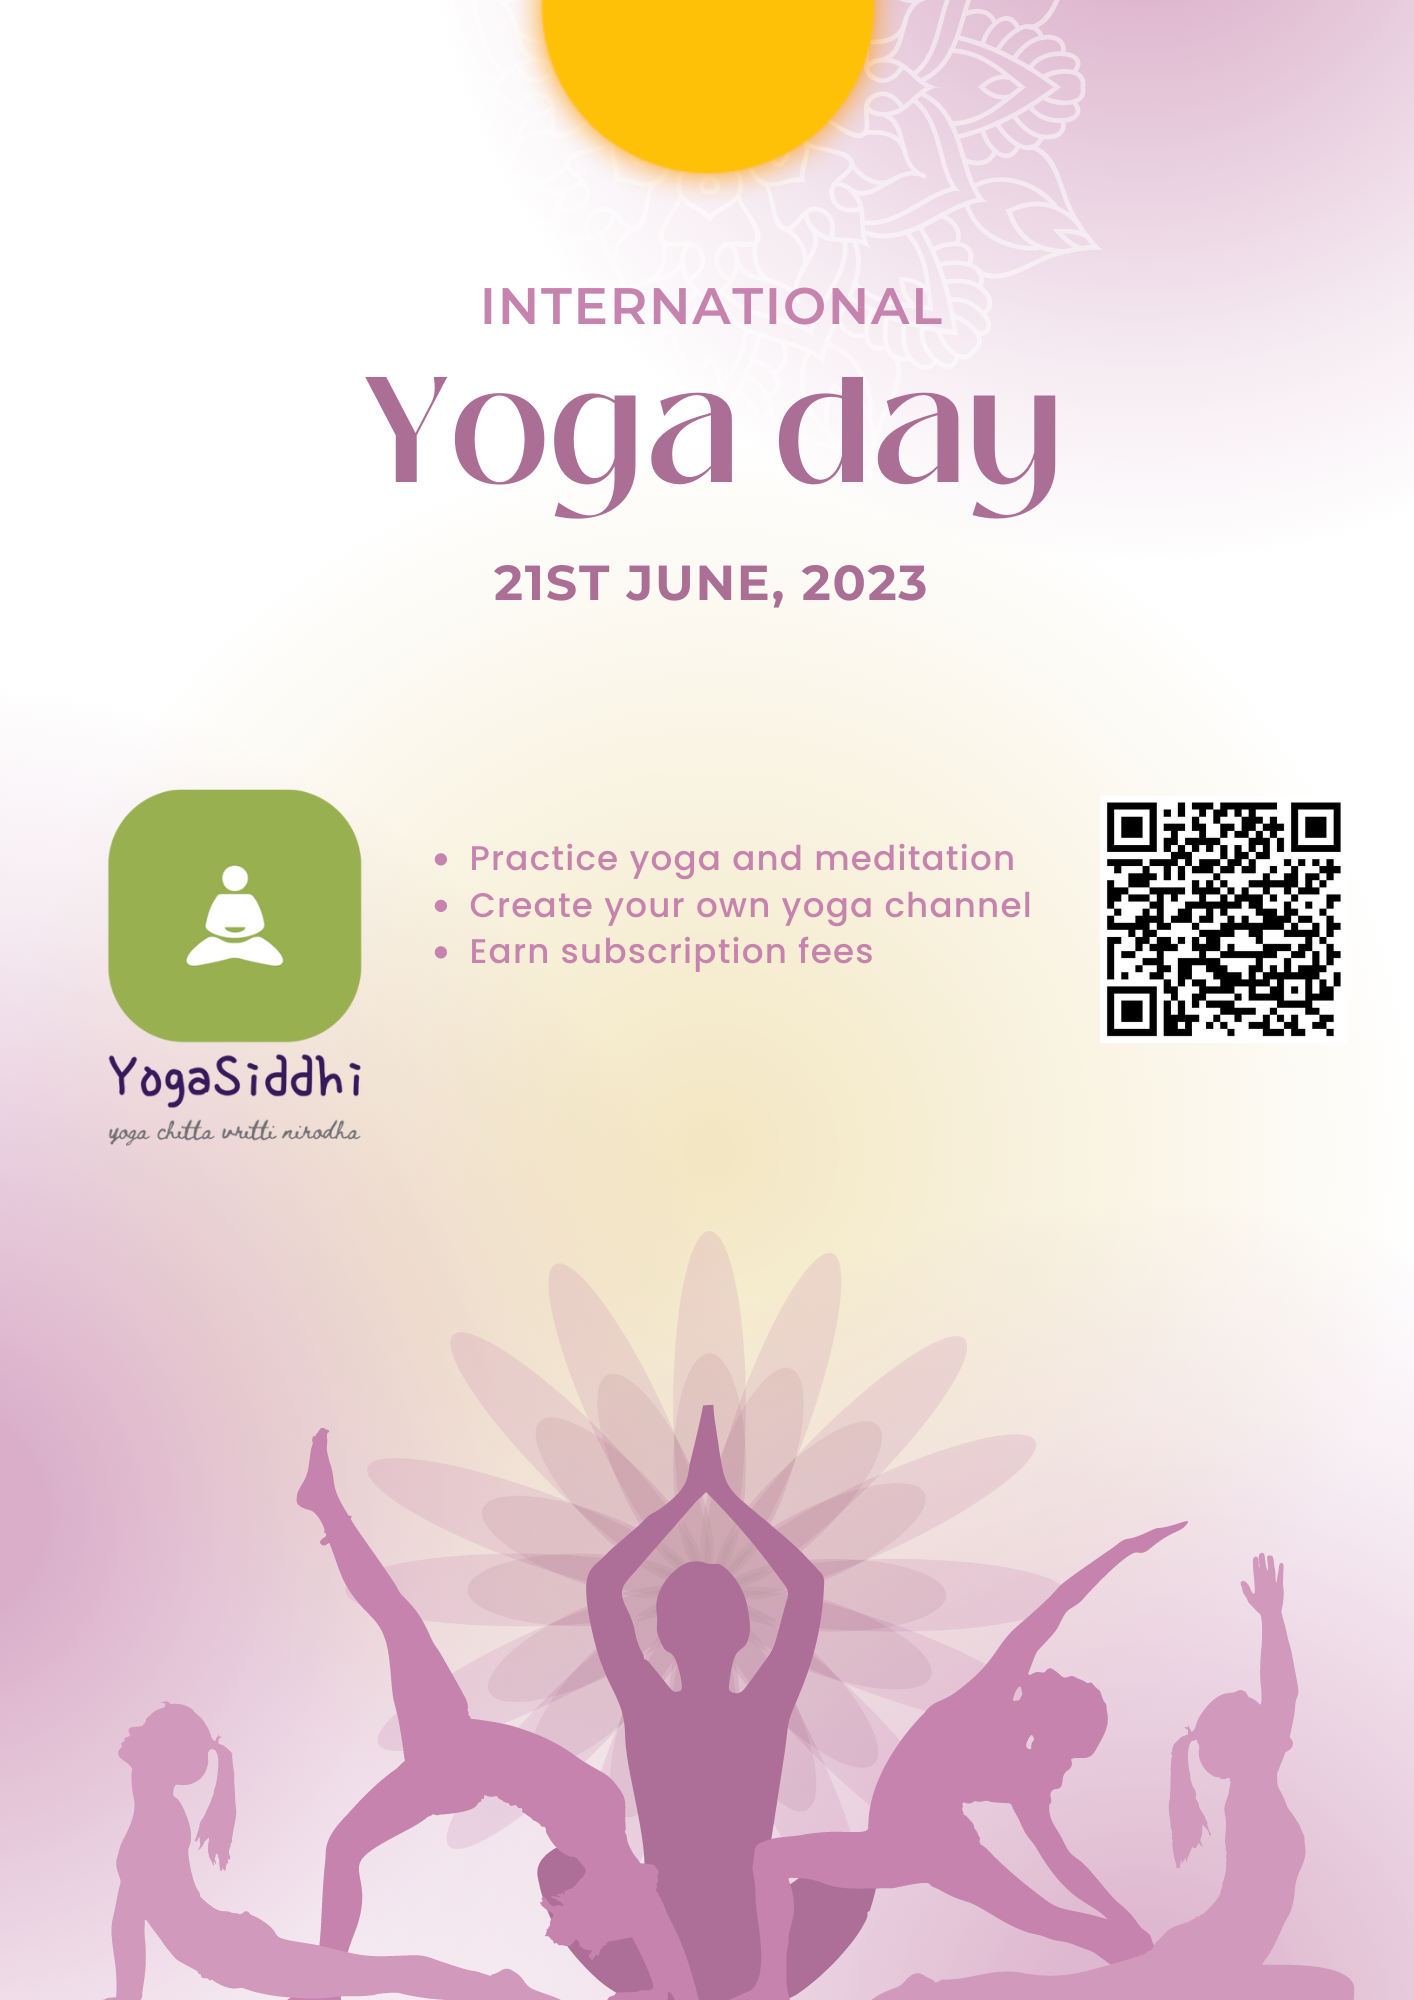 Instaoffyz Launches New Yoga and Meditation Video App, YogaSiddhi, for Users and Yoga Trainers